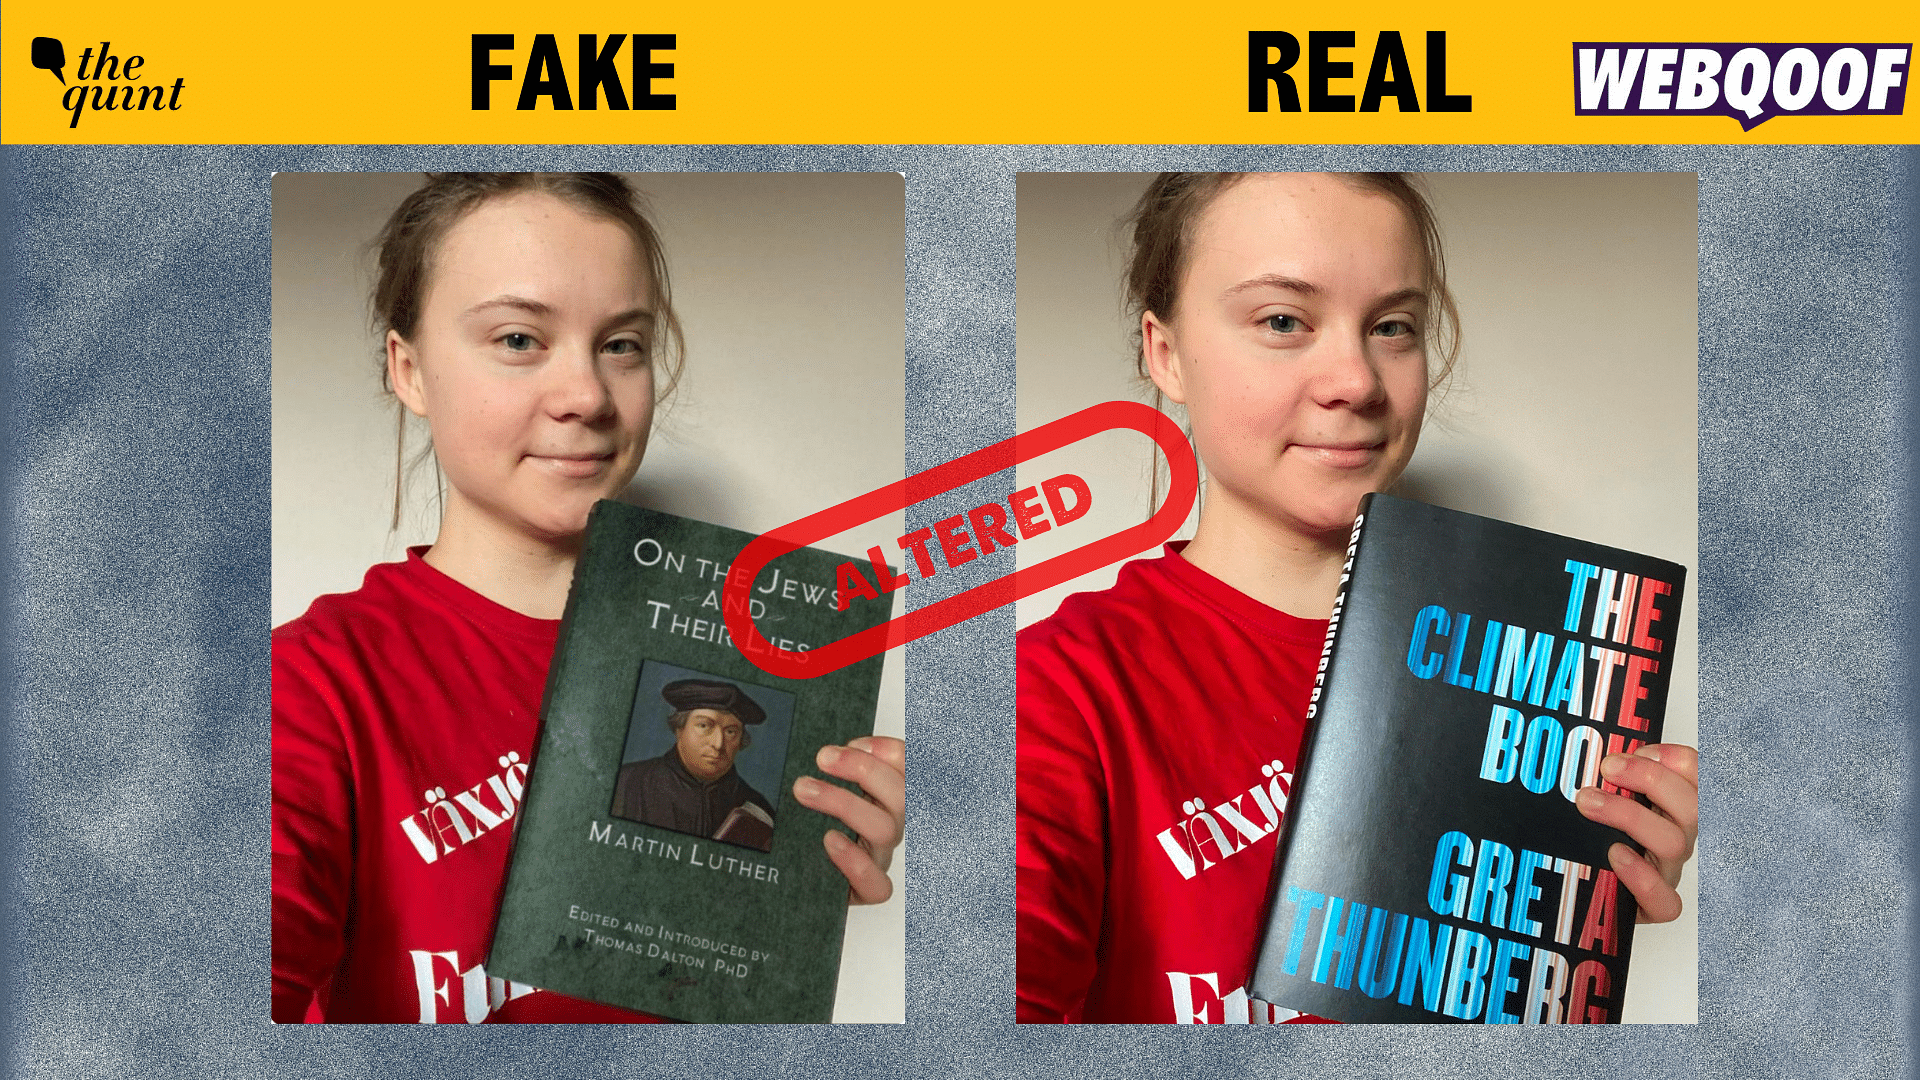 <div class="paragraphs"><p>Fact-Check: This image is altered. The original image shows Greta Thunberg with her book titled, "The Climate Book."</p></div>